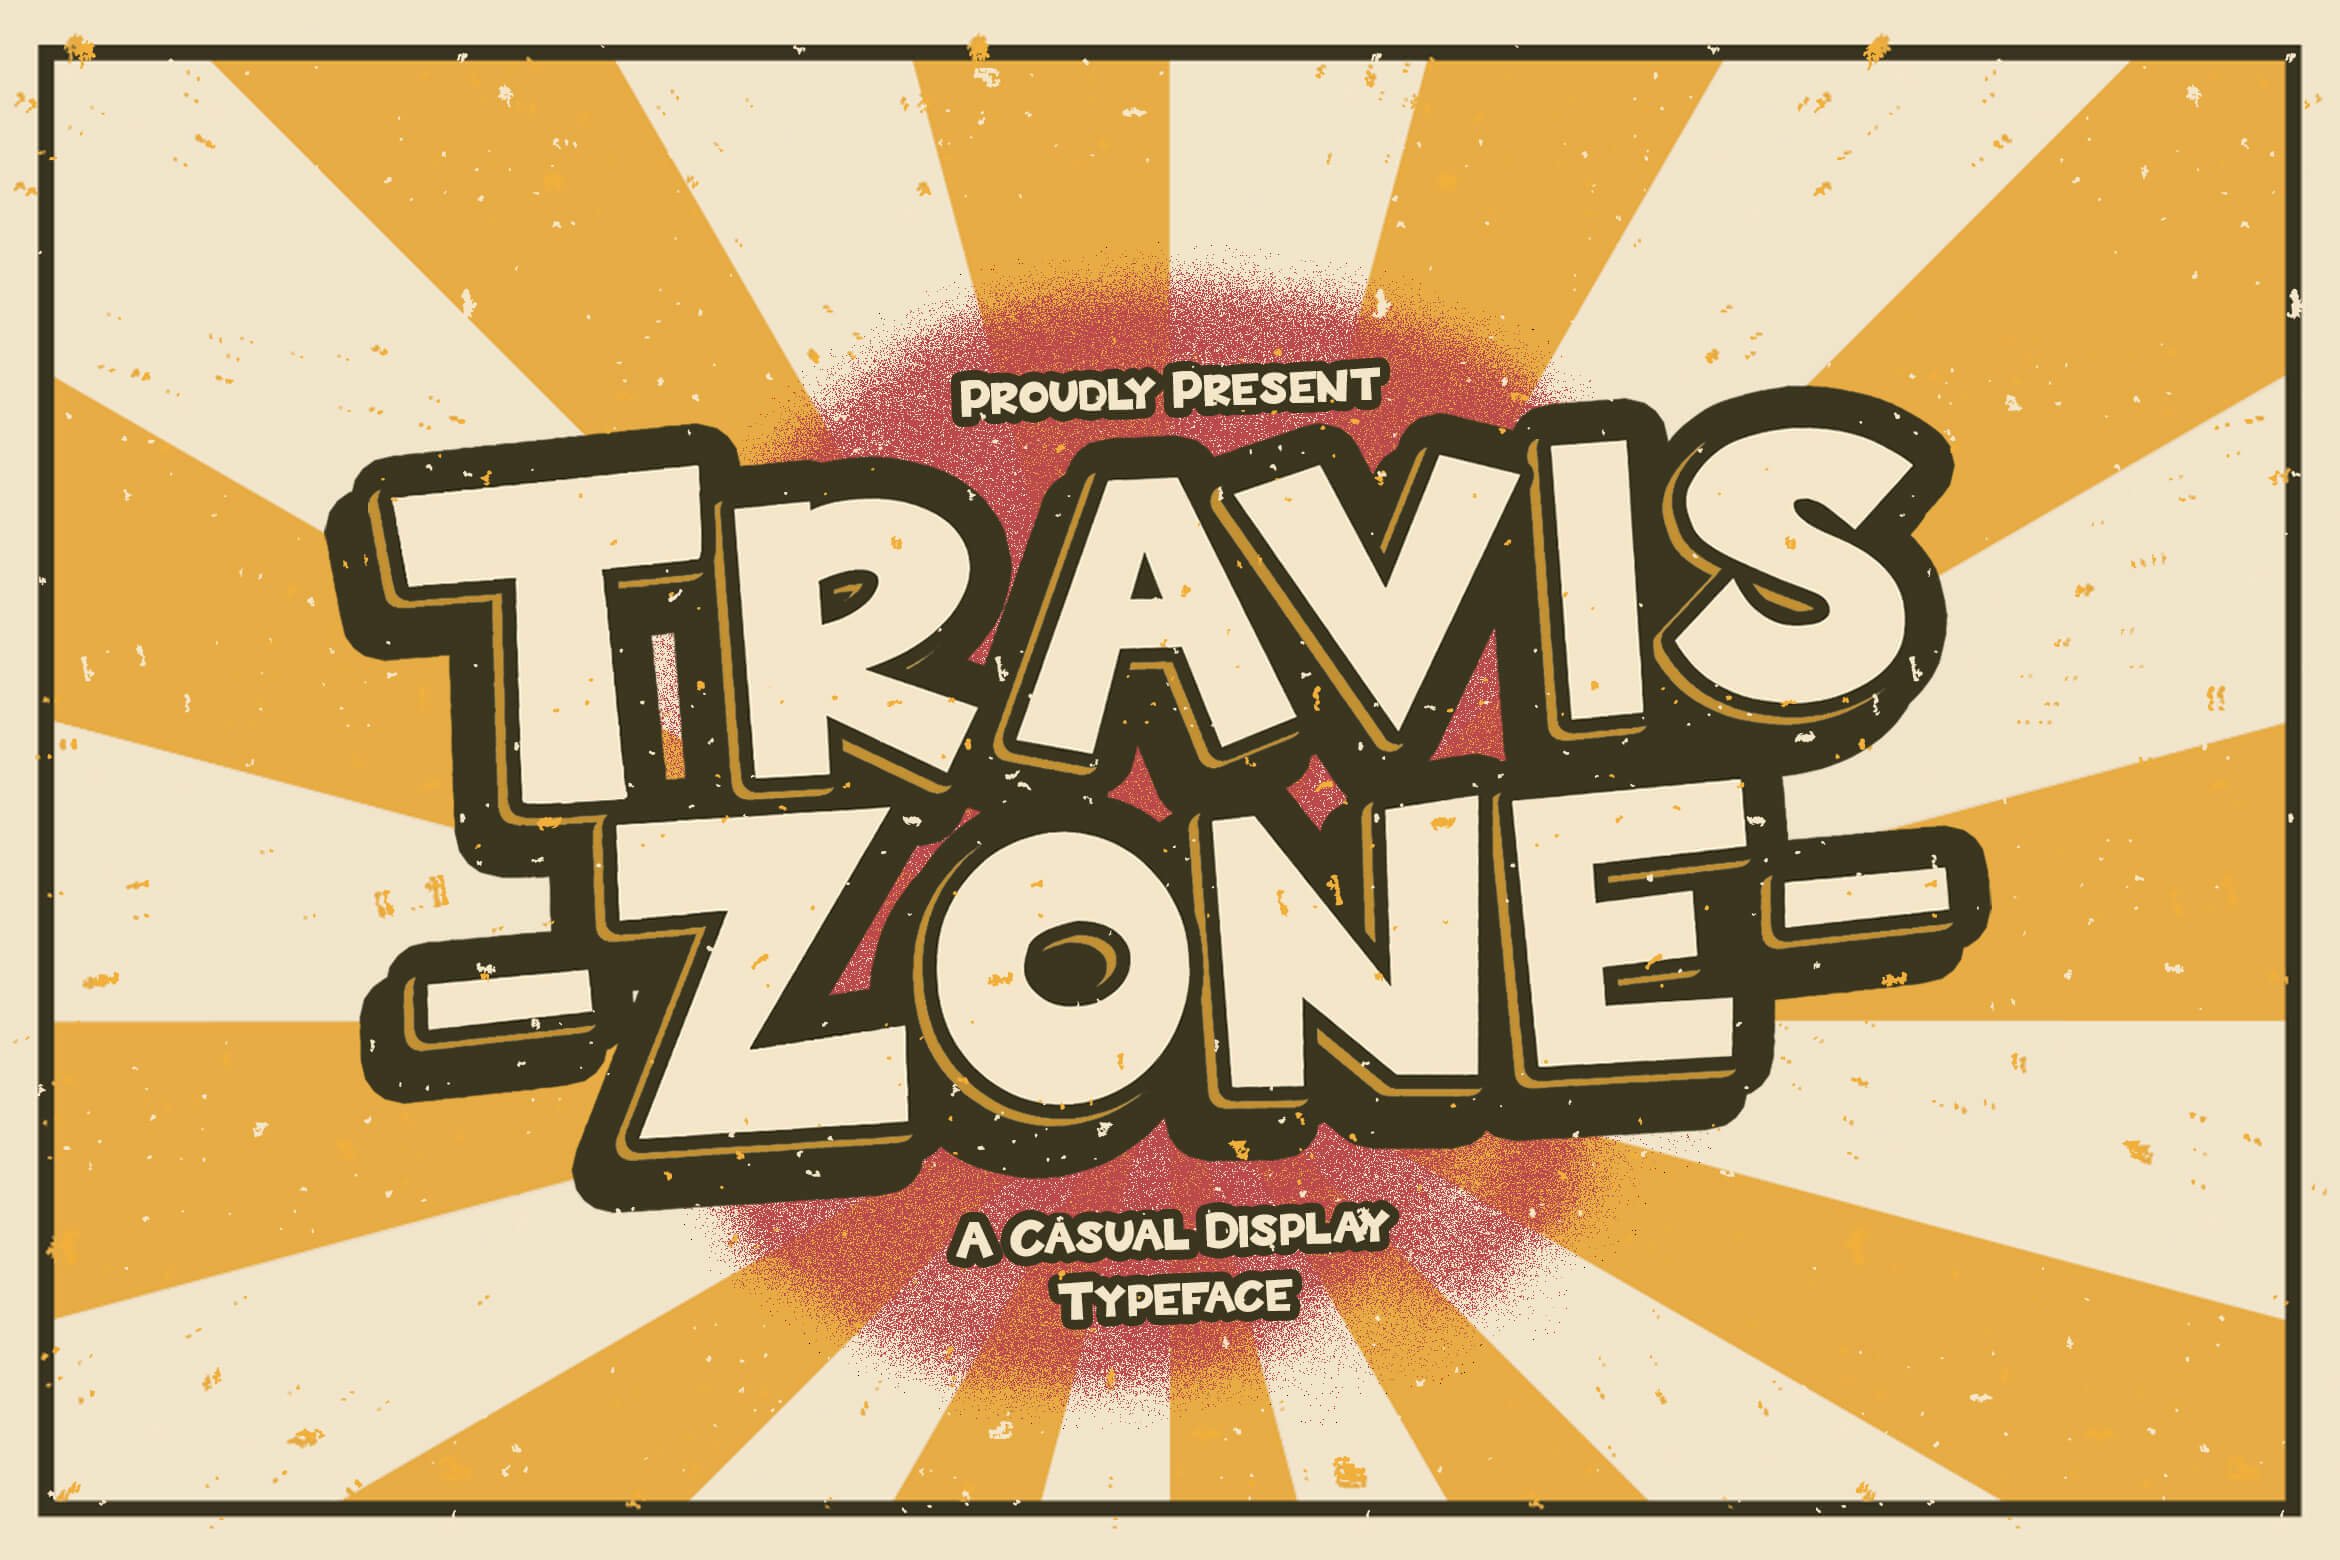 Travis Zone - Playful Display Font cover image.